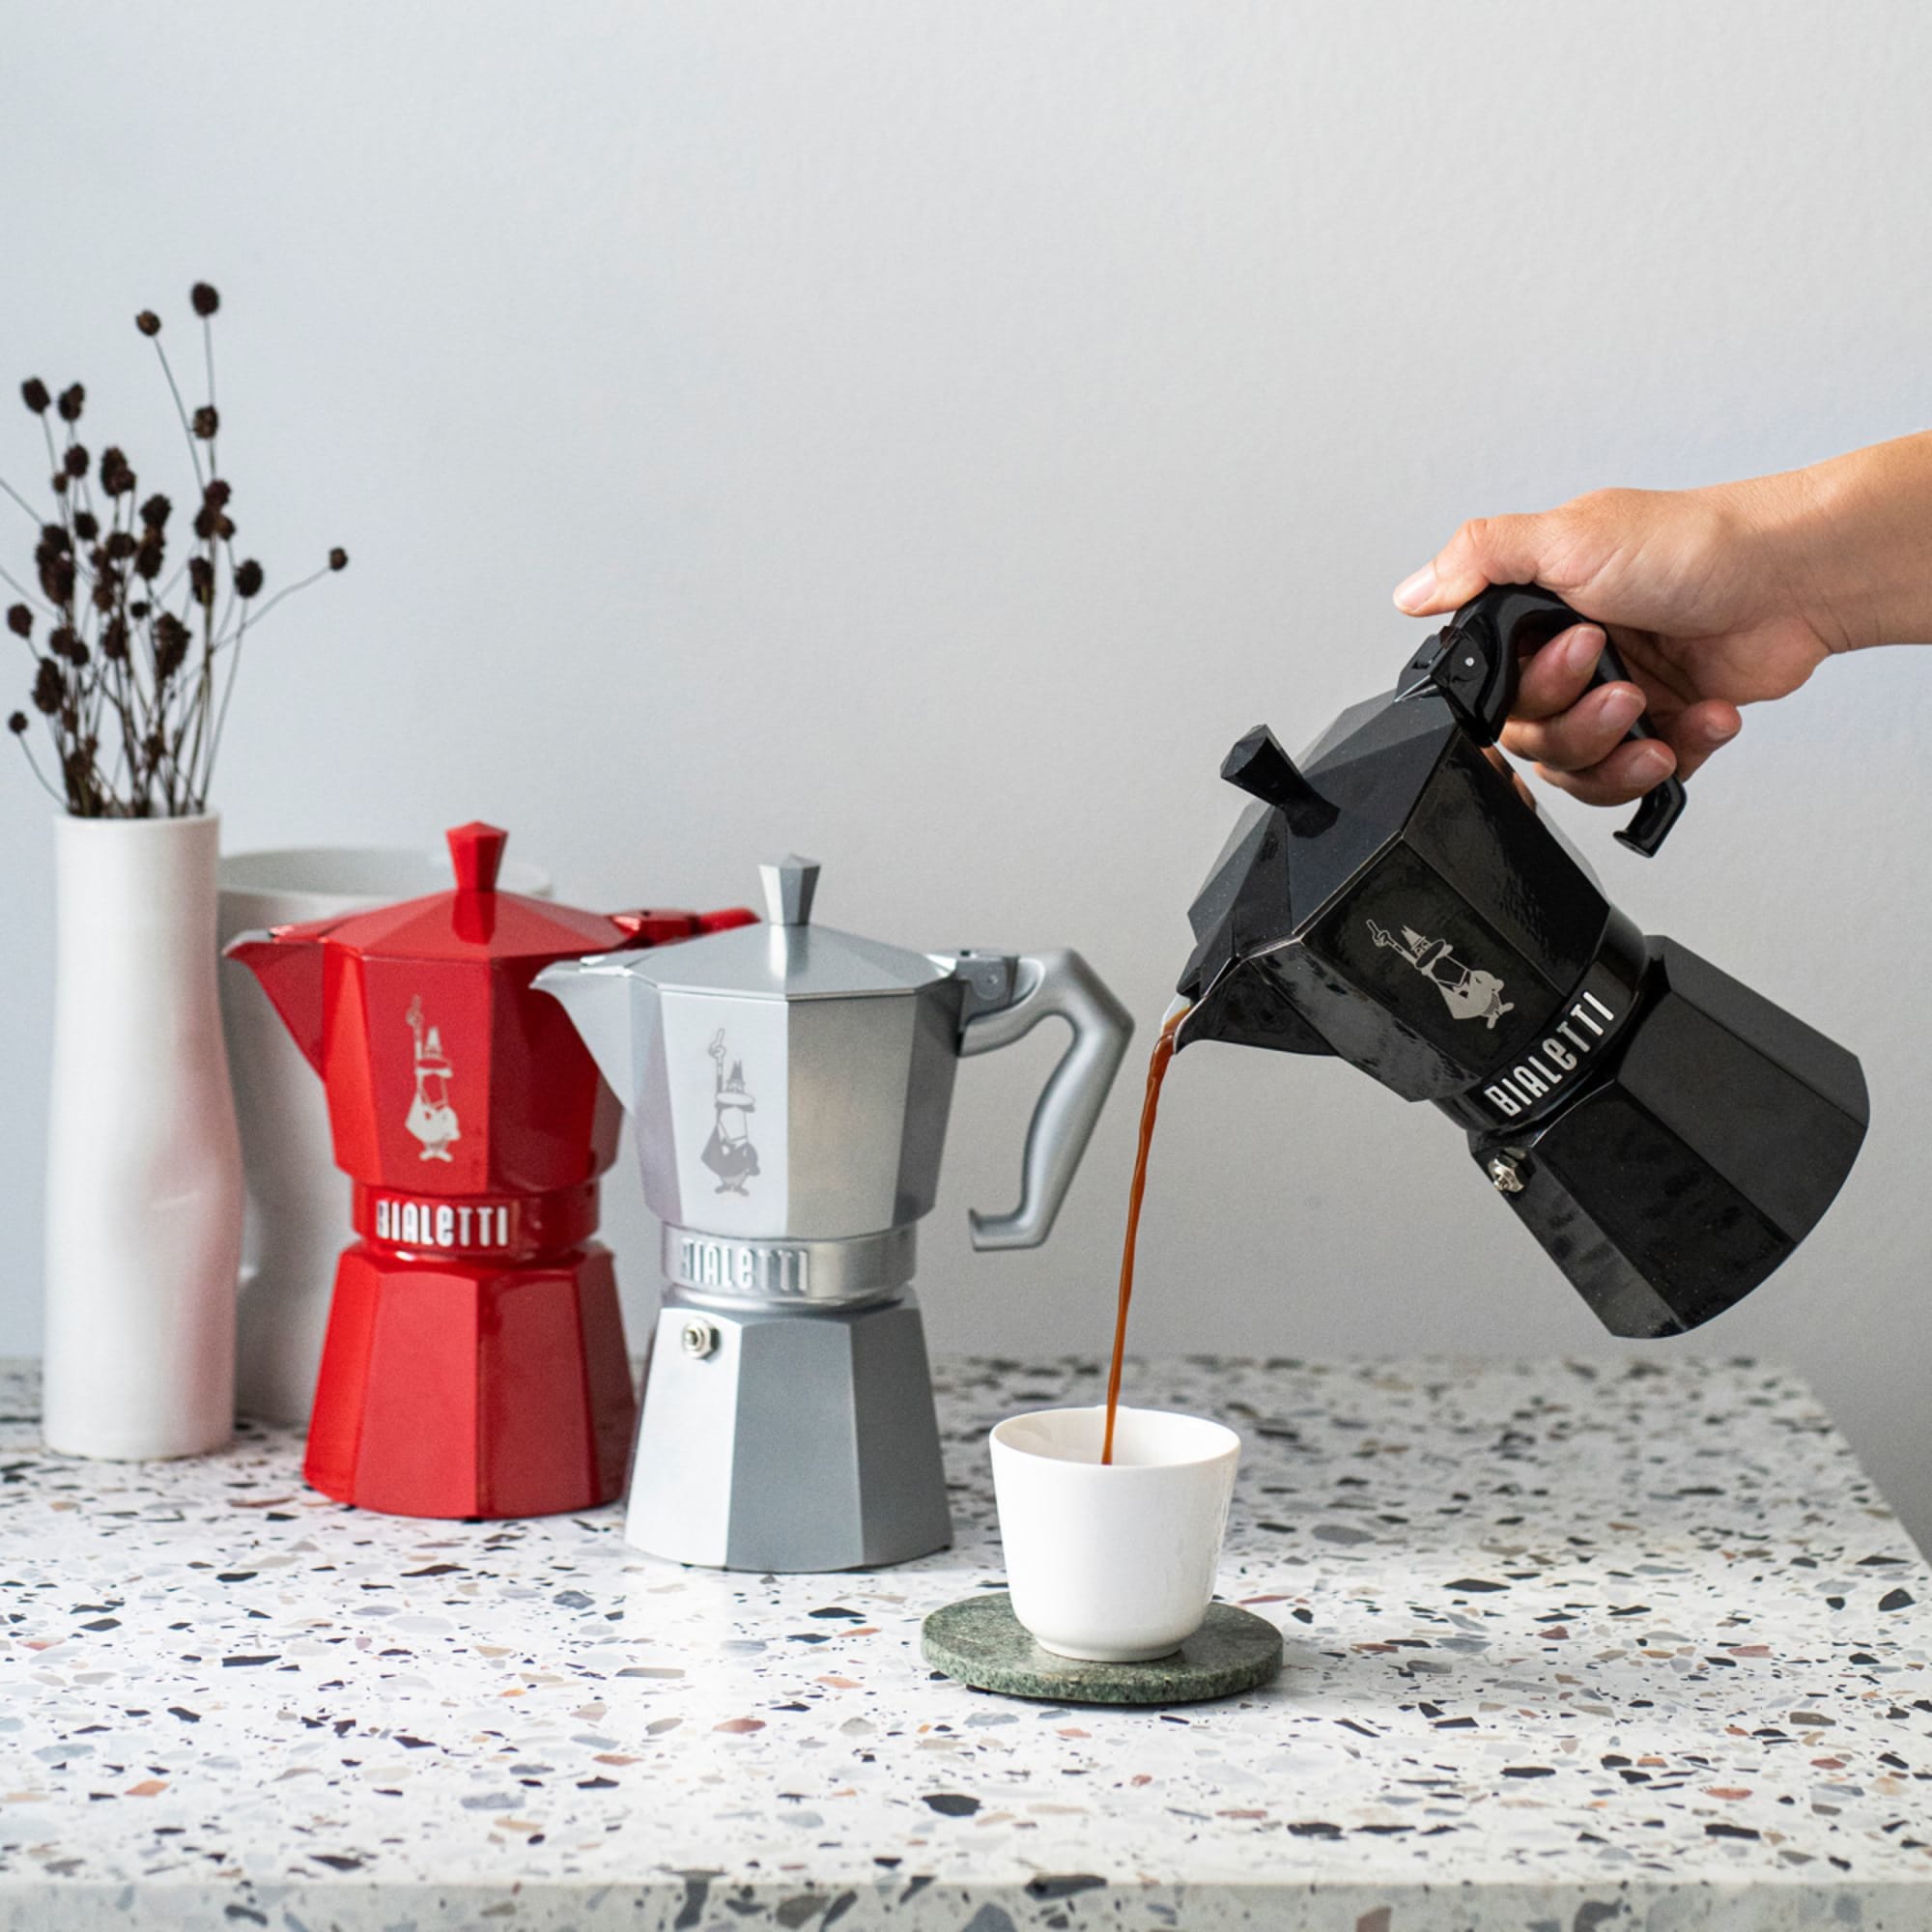 Bialetti Musa Induction Coffee suitable for a wide range of occasions